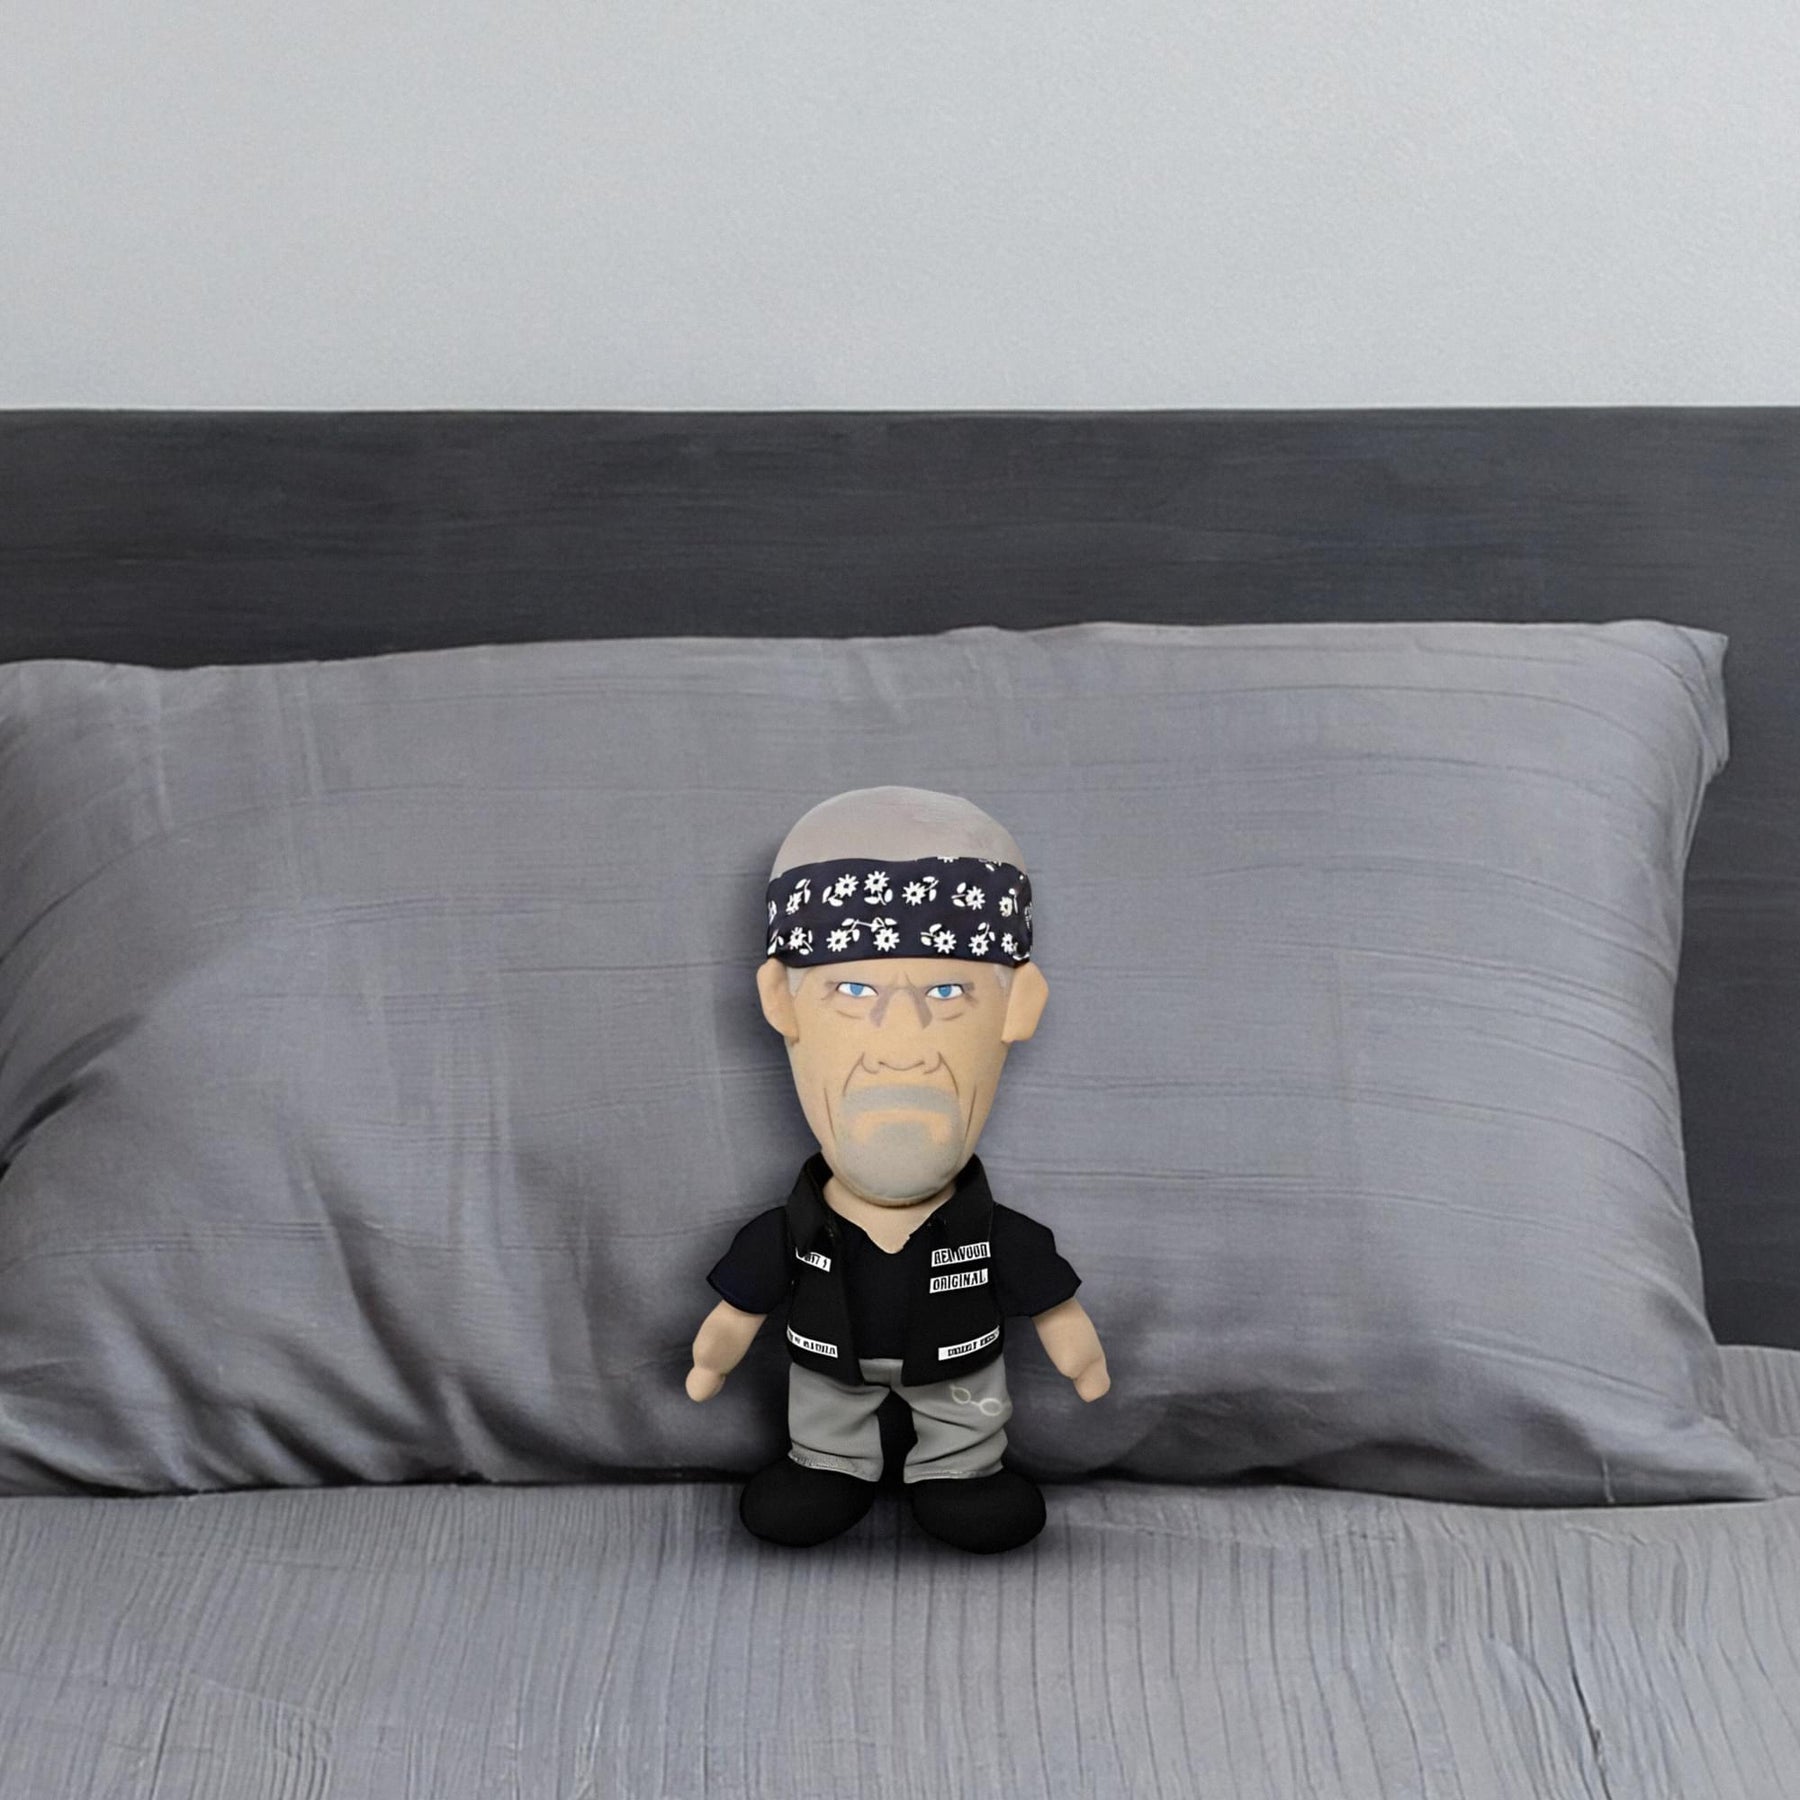 Sons Of Anarchy Clay Morrow 8" Plush